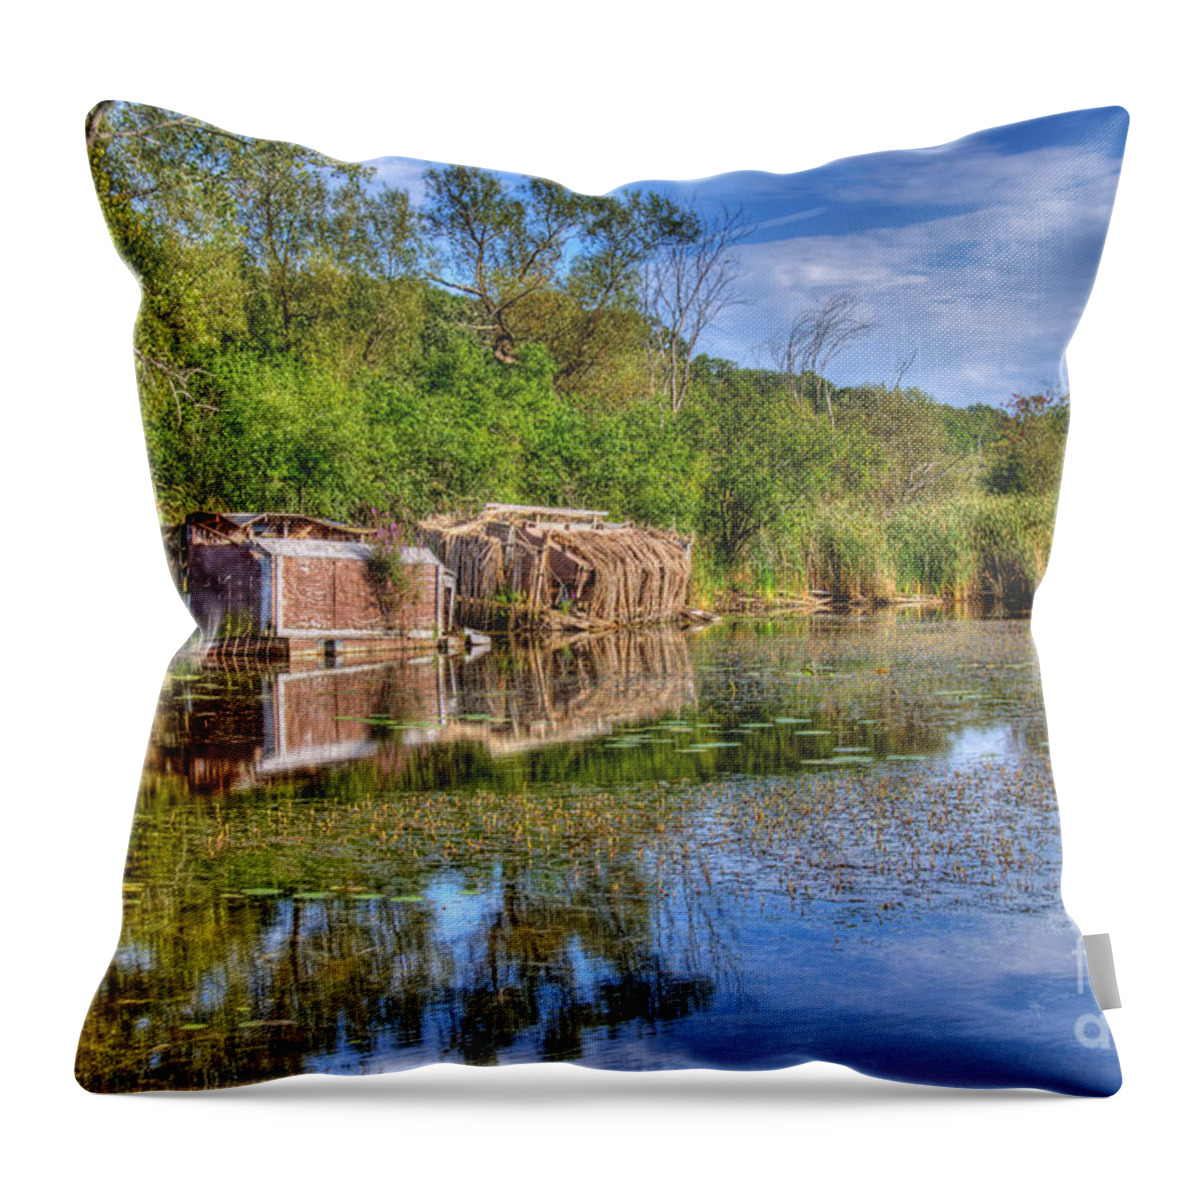 Swamp Throw Pillow featuring the photograph Swamp by Dejan Jovanovic